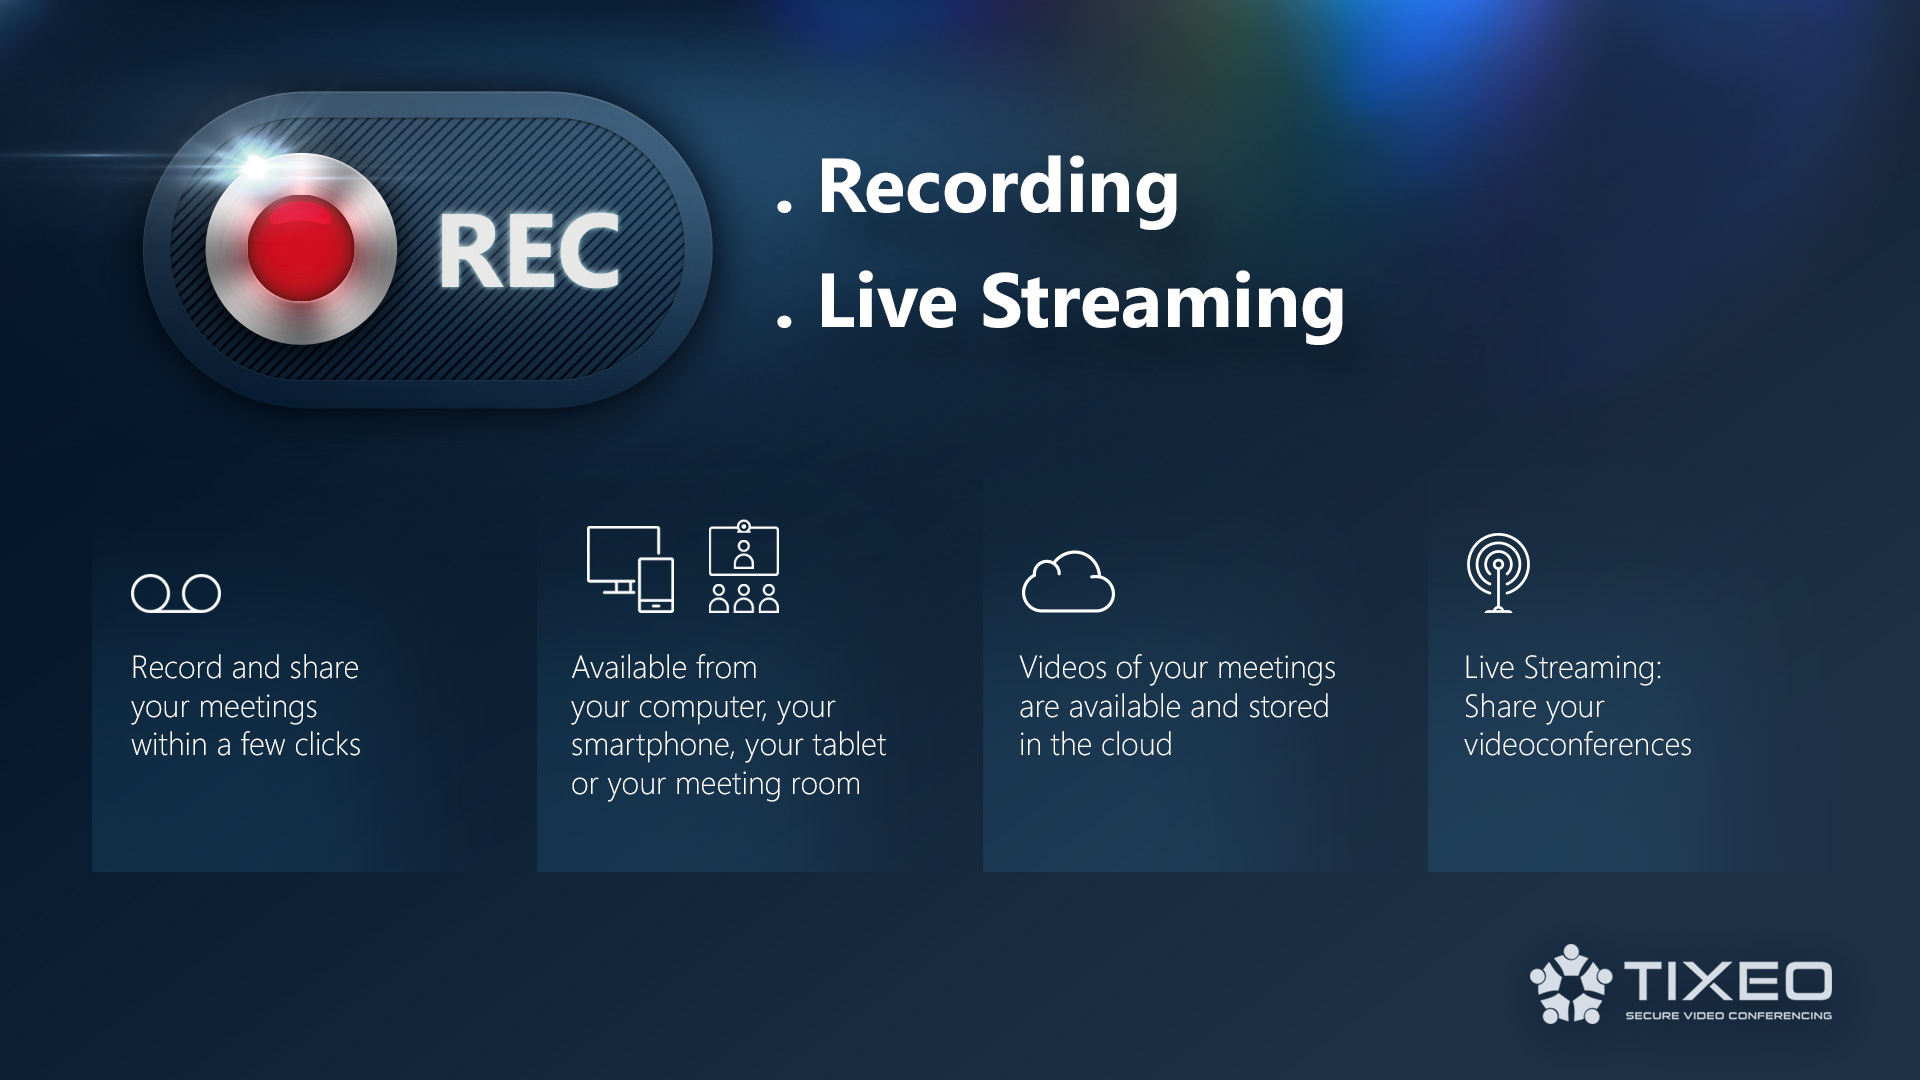 Tixeo launches a new recording and broadcasting service